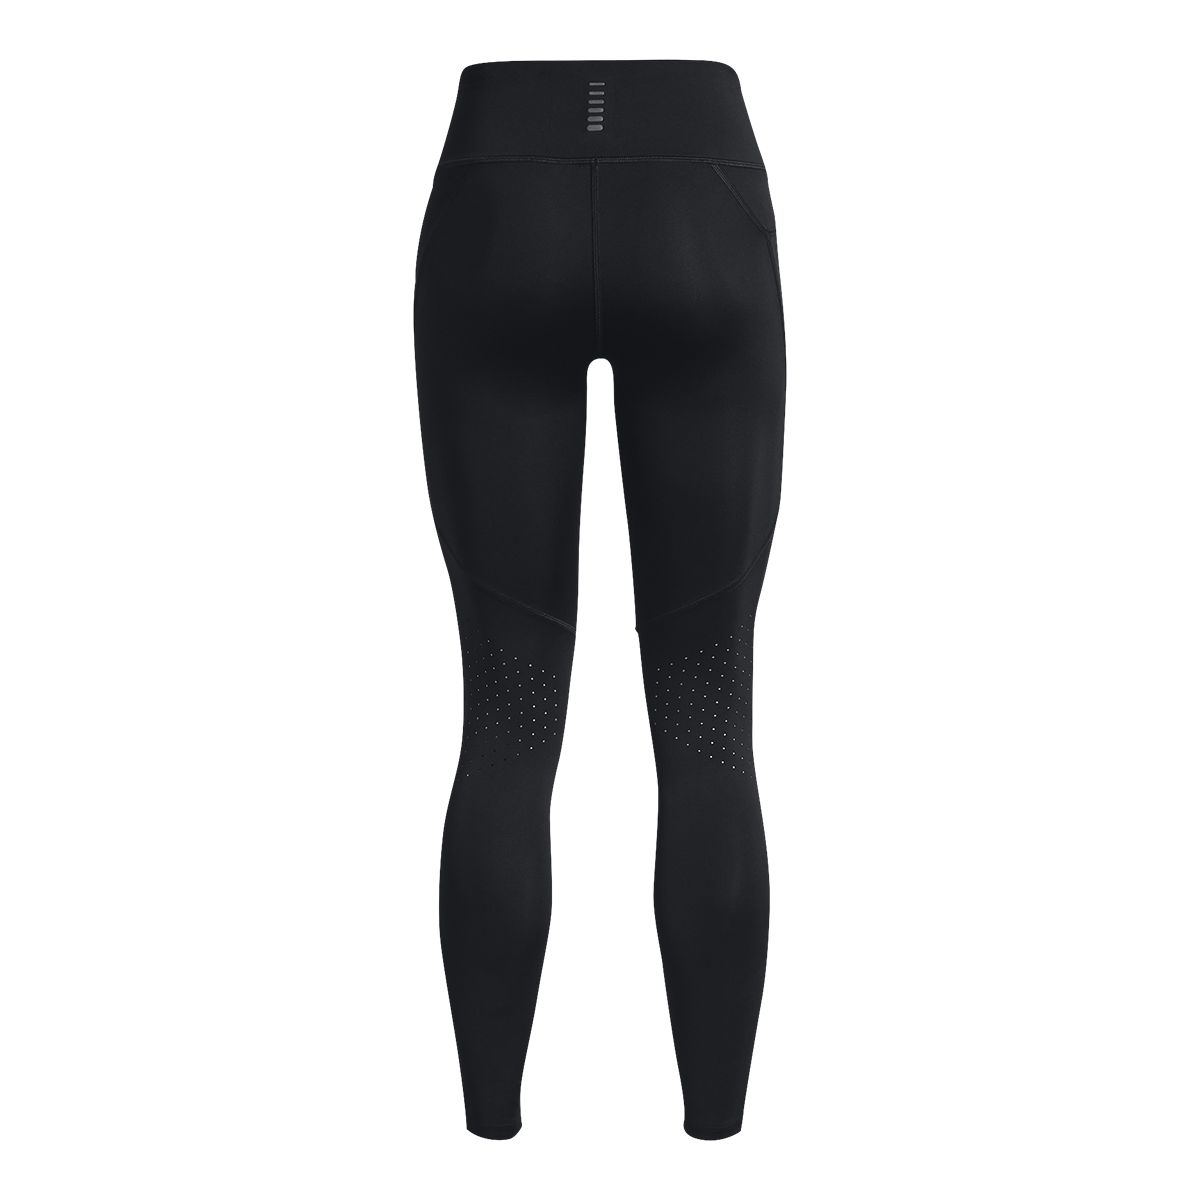 Under Armour Women's Fly Fast 3.0 Tight